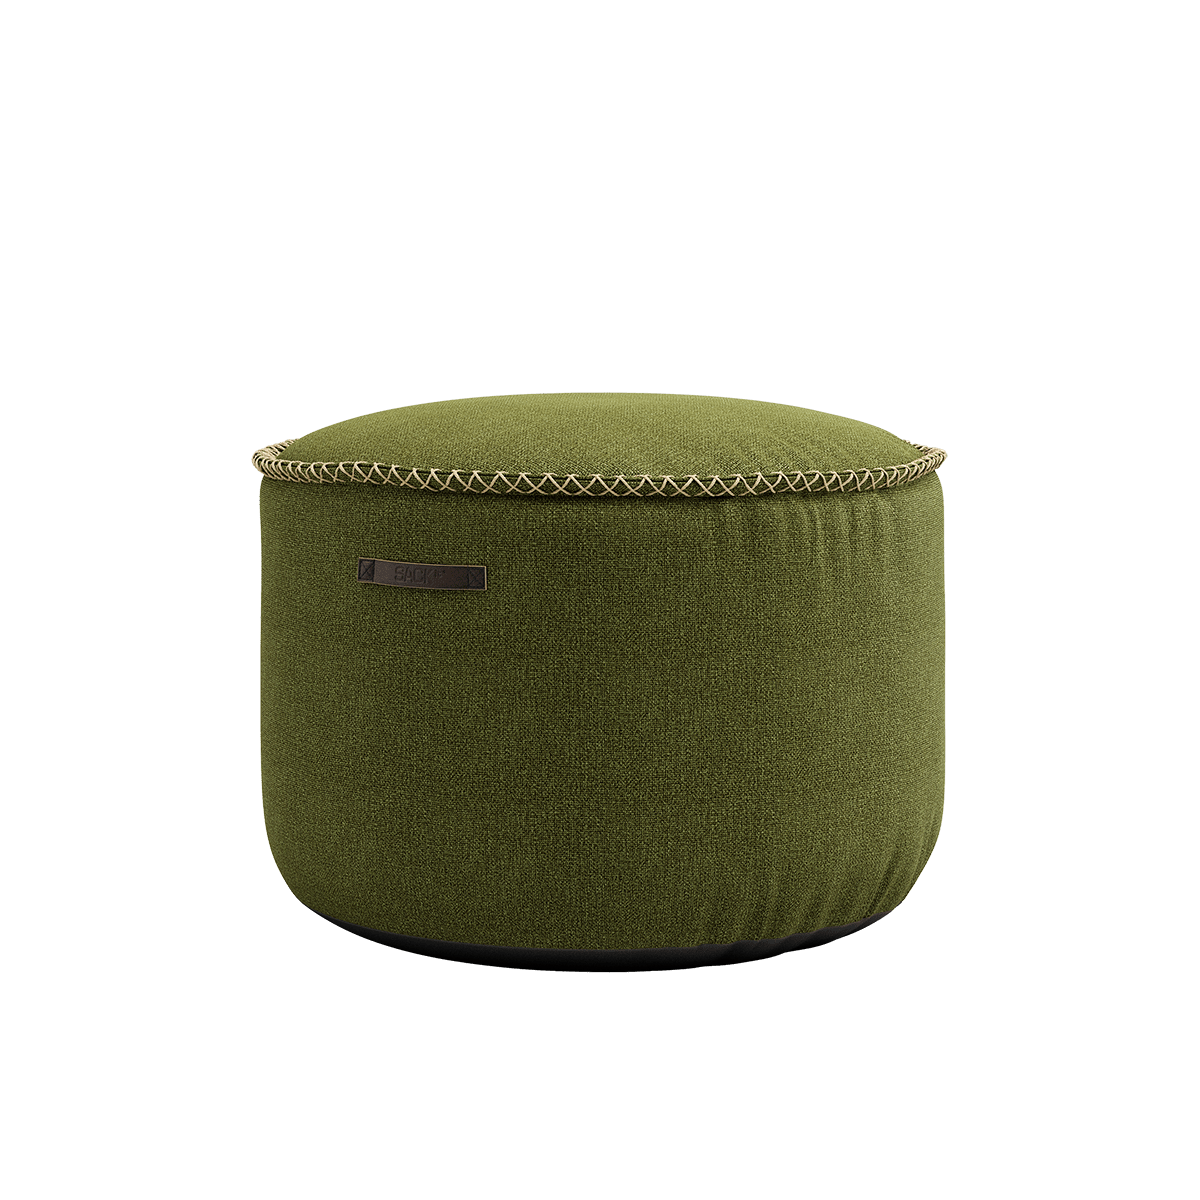 variant_8567012% | Medley Pouf [Contract] - Medley Moss | SACKit